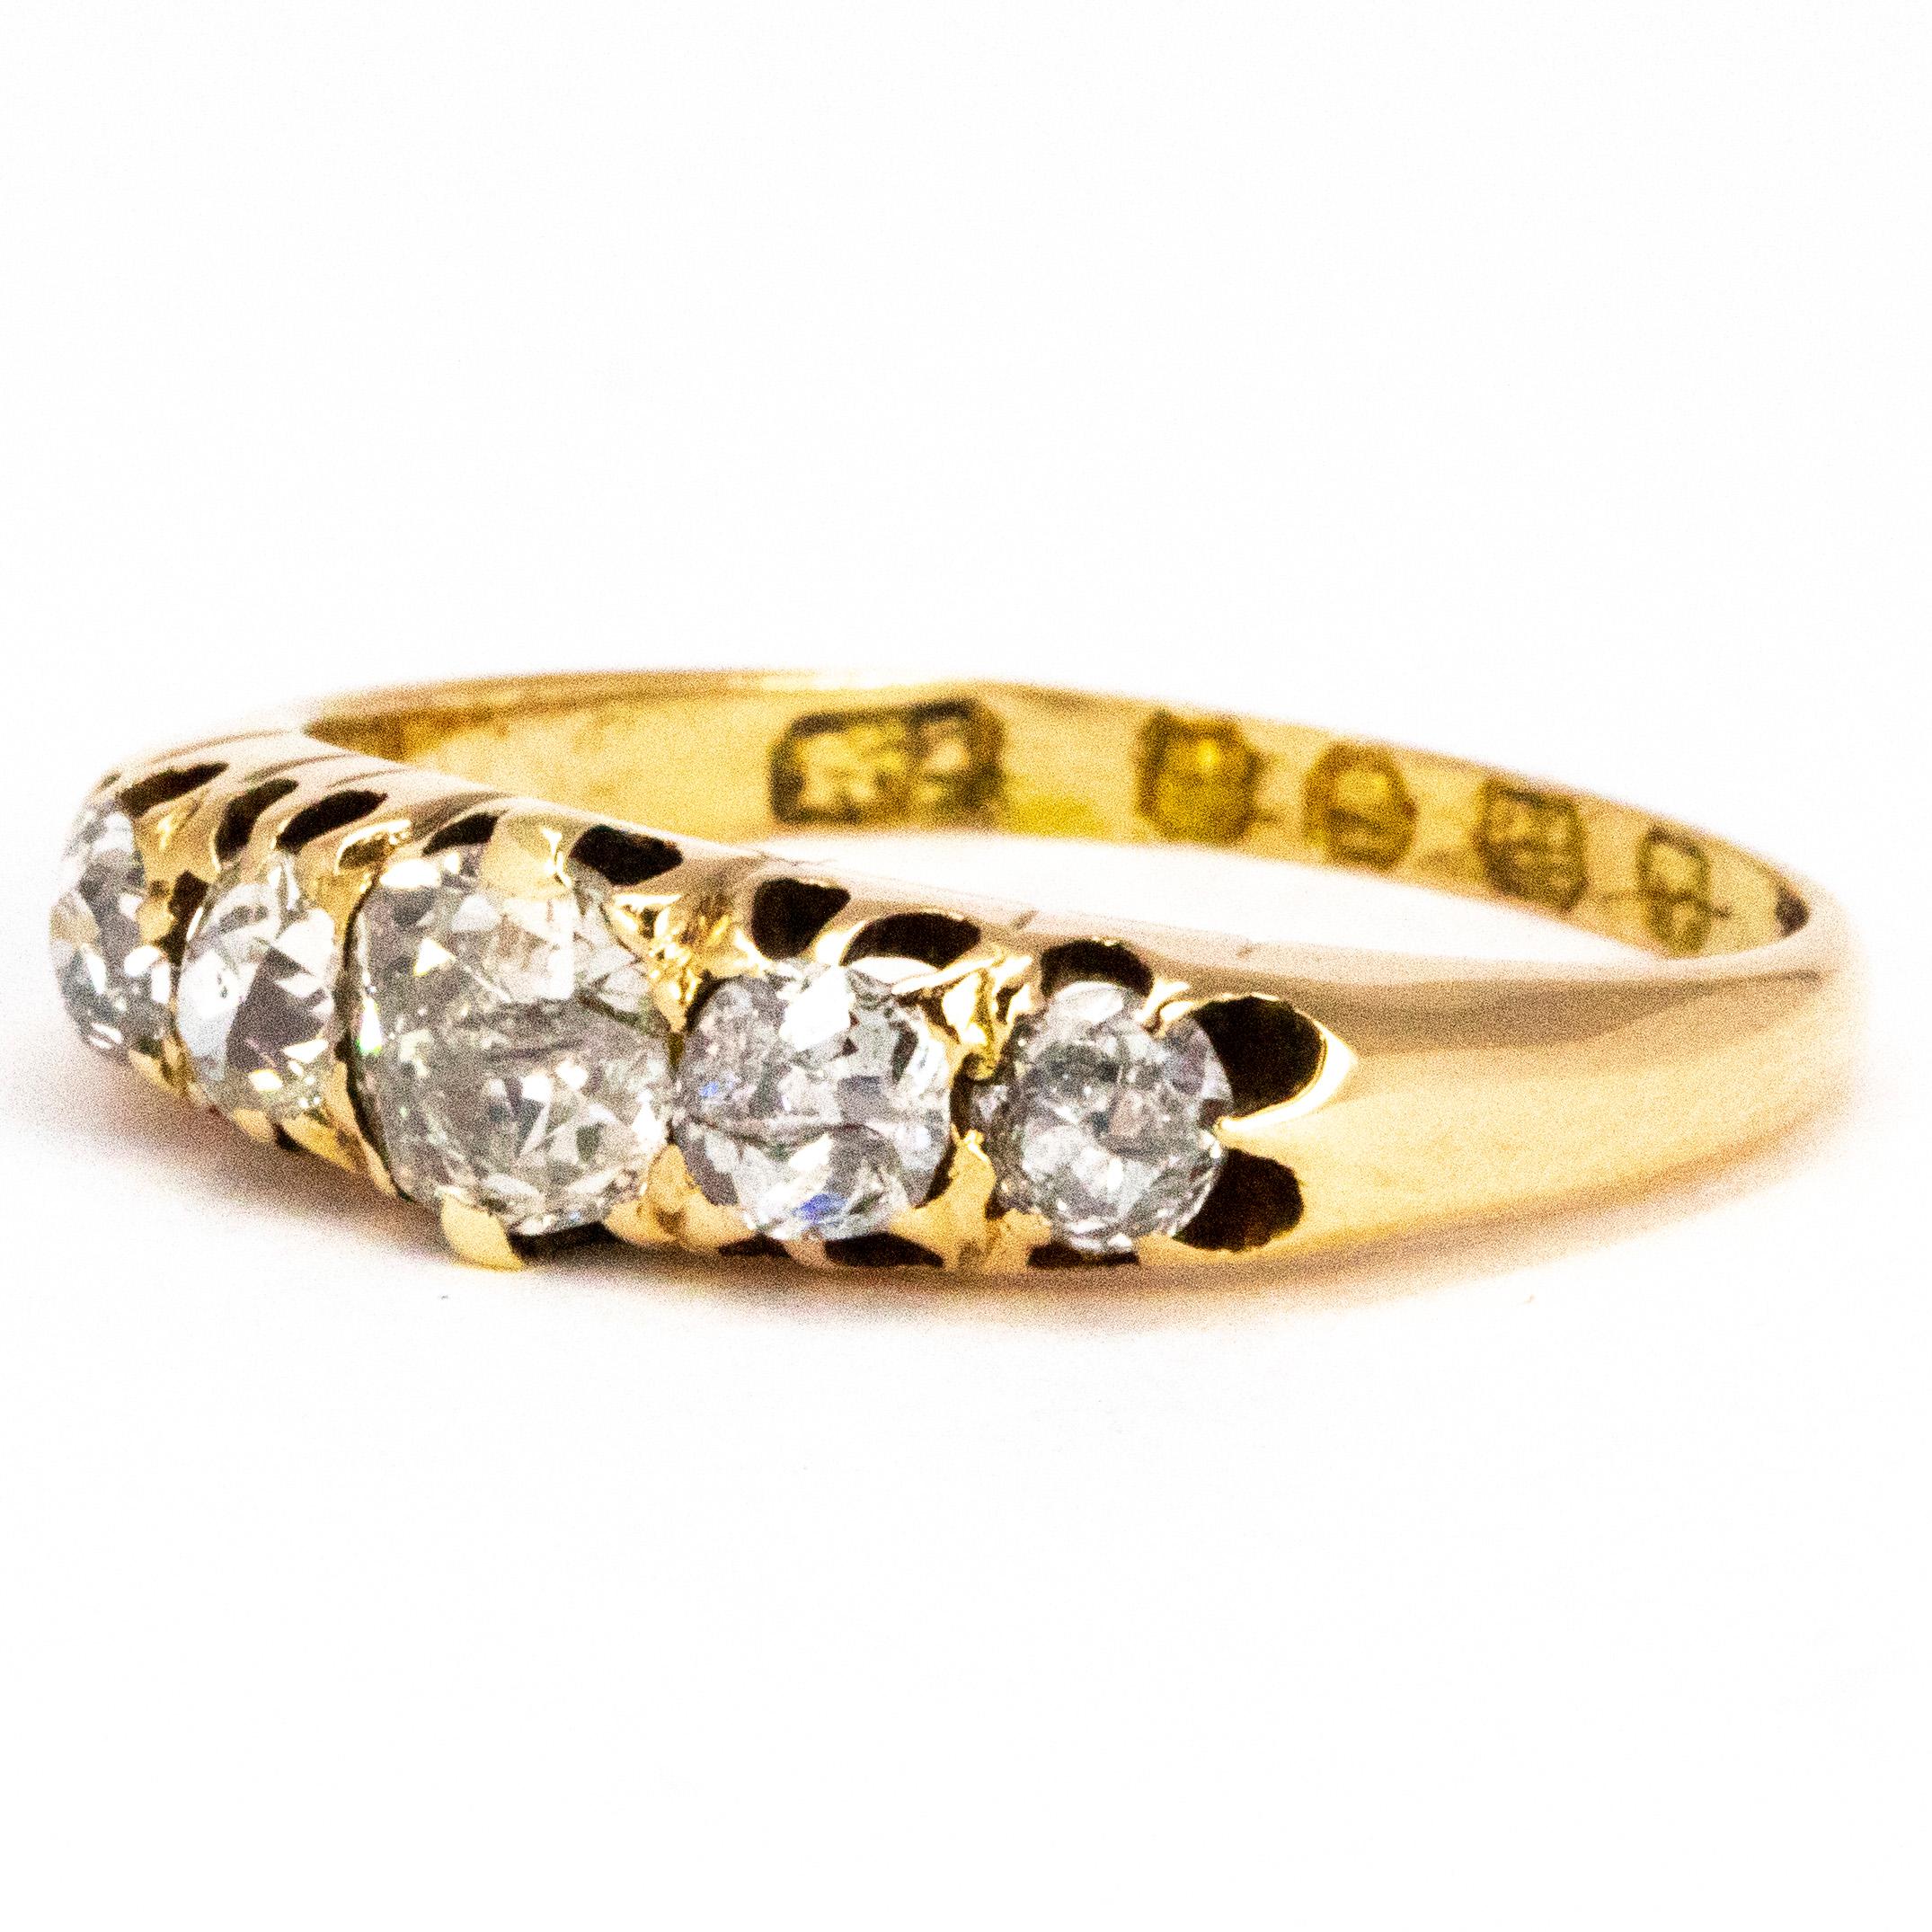 This gorgeous five stone is a classic design and holds five sparkling diamonds. The centre stone measures 45pts, the next smallest measure 20pts and the smallest stones measure 15pts.  The diamonds are J/K colour SI2 and are old mine cut. 

Ring